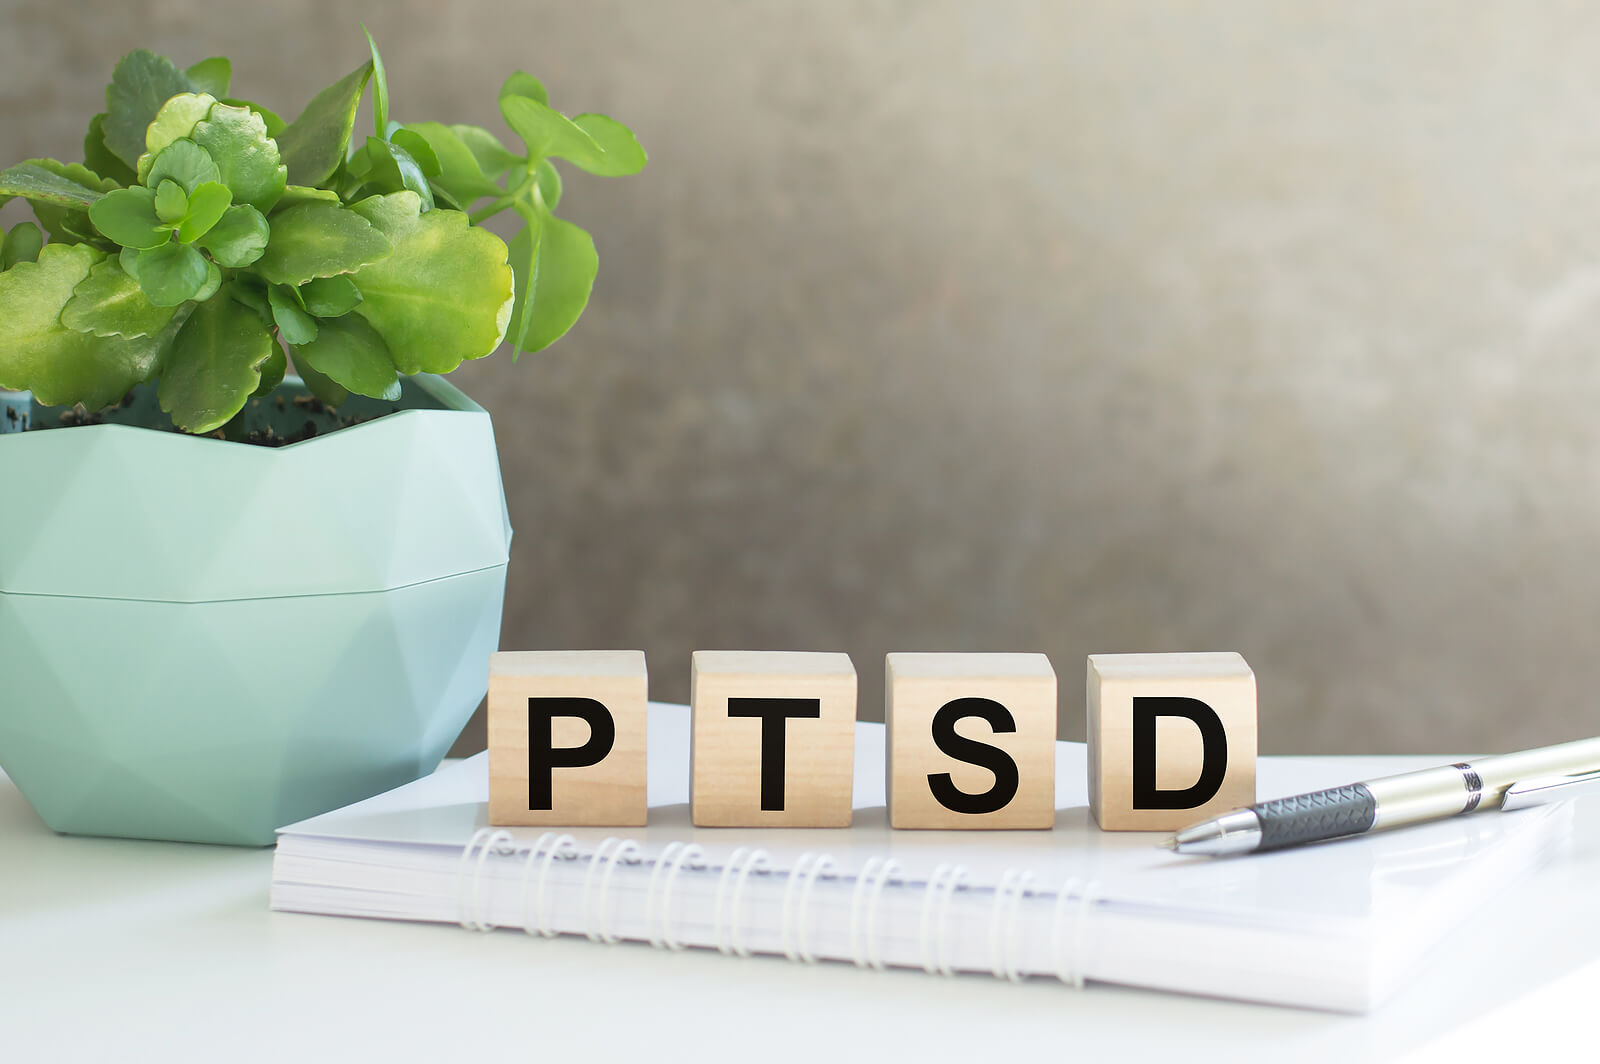 Tiles spell out PTSD next to a small plant. PE therapy is shown to help treat PTSD effectively. Prolonged exposure therapy in Ohio is available to help!